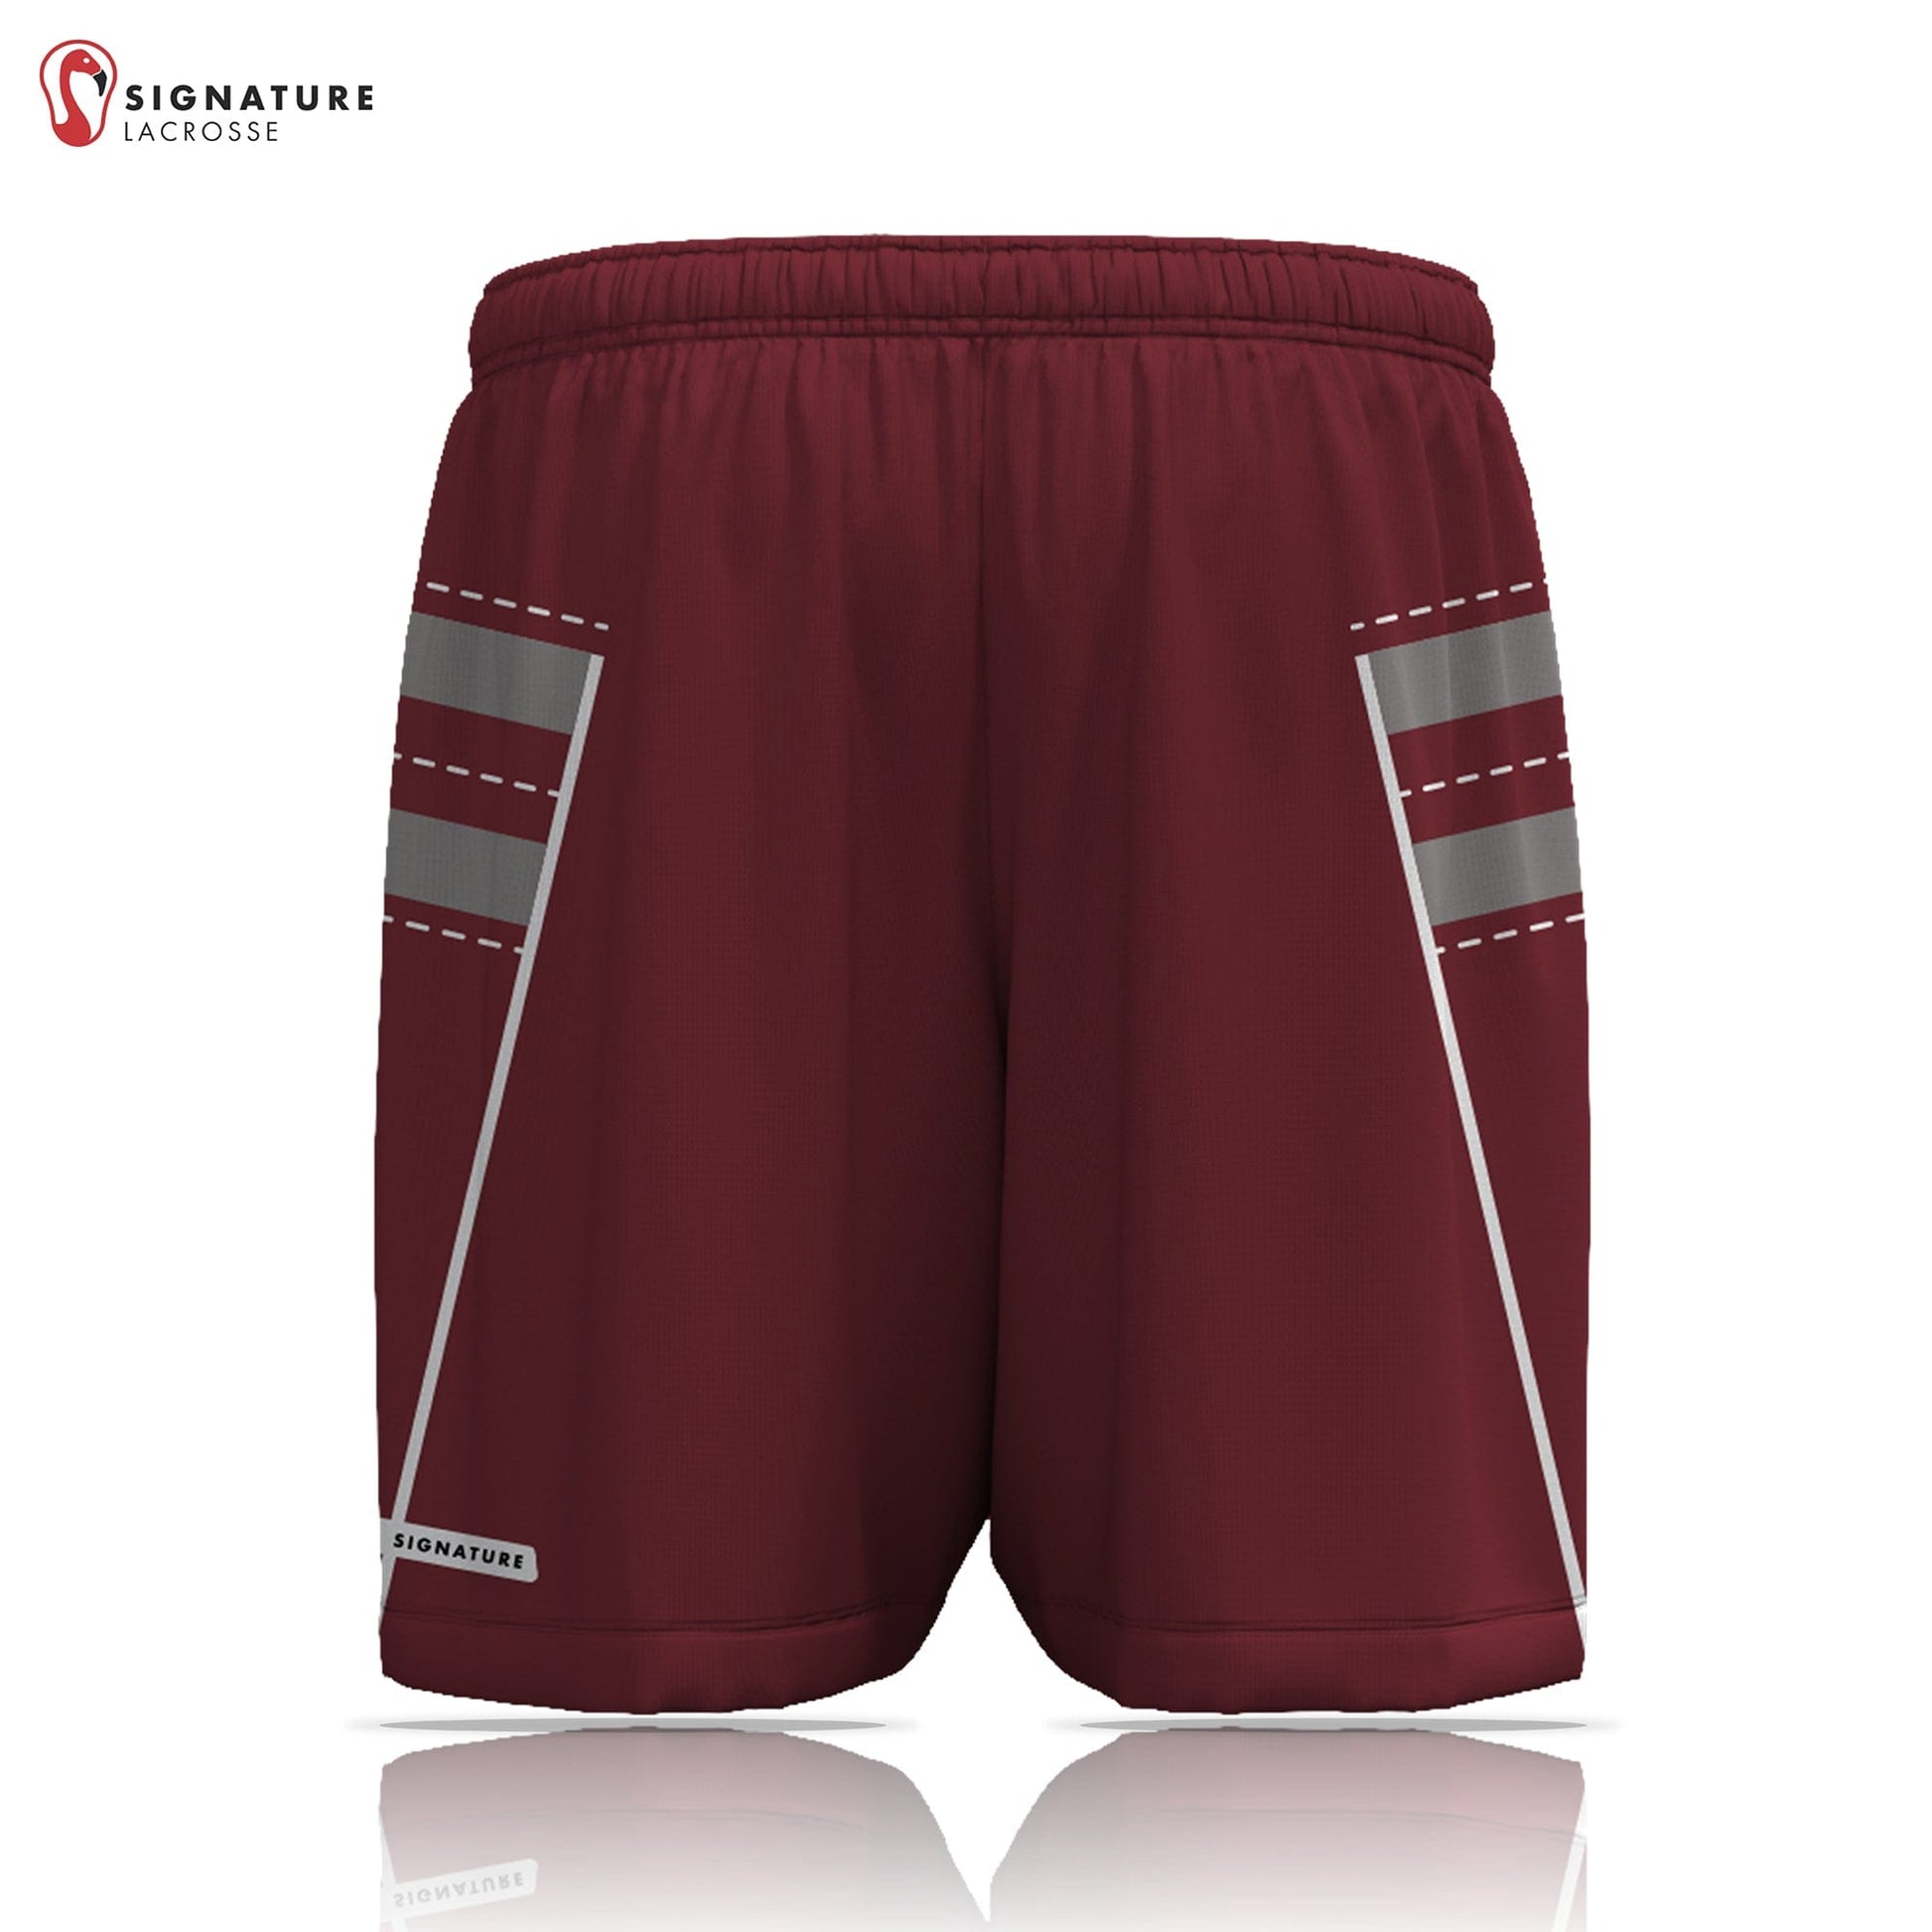 Westford Youth Lacrosse Men's Player Game Shorts Signature Lacrosse